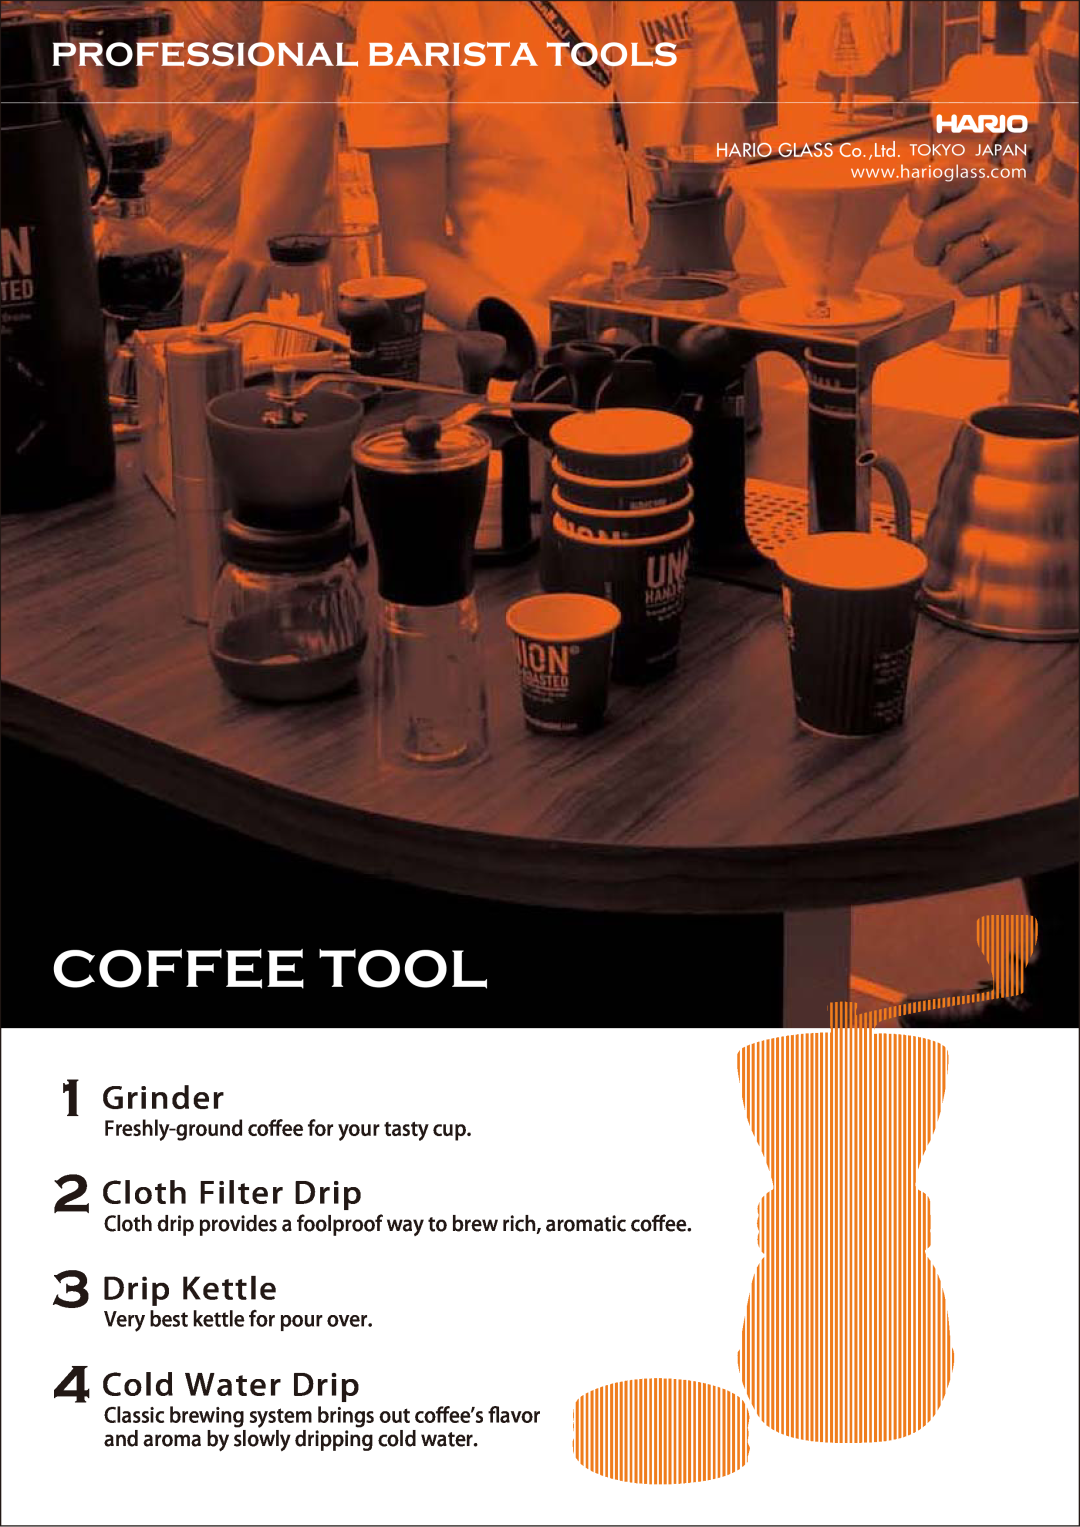 Hario Glass NXA-5, SCA-5 Coffee Tool, Professional Barista Tools, Grinder, Cloth Filter Drip, Drip Kettle, Cold Water Drip 